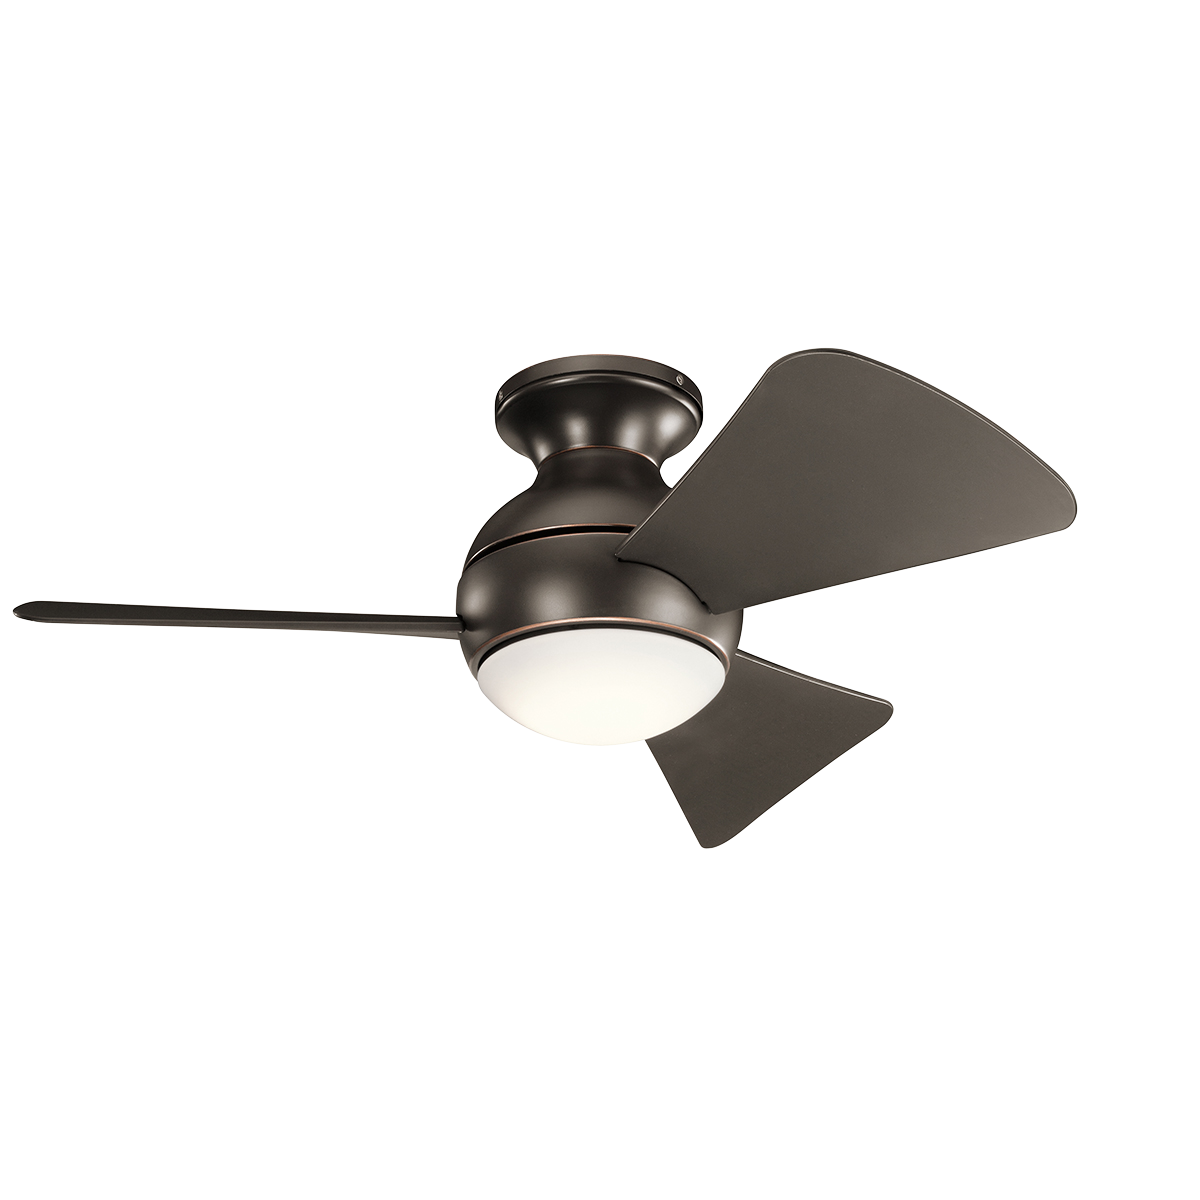 34 Inch Sola Fan in OZ,in. This Olde Bronze 34 inch ceiling fan from the Sola collection which can be used in wet locations, features integrated LED lighting and flush mount installation.  The globe inspired motor housing shape brings delightful style to any space.  A metal fixture cap is included for non light use installations.